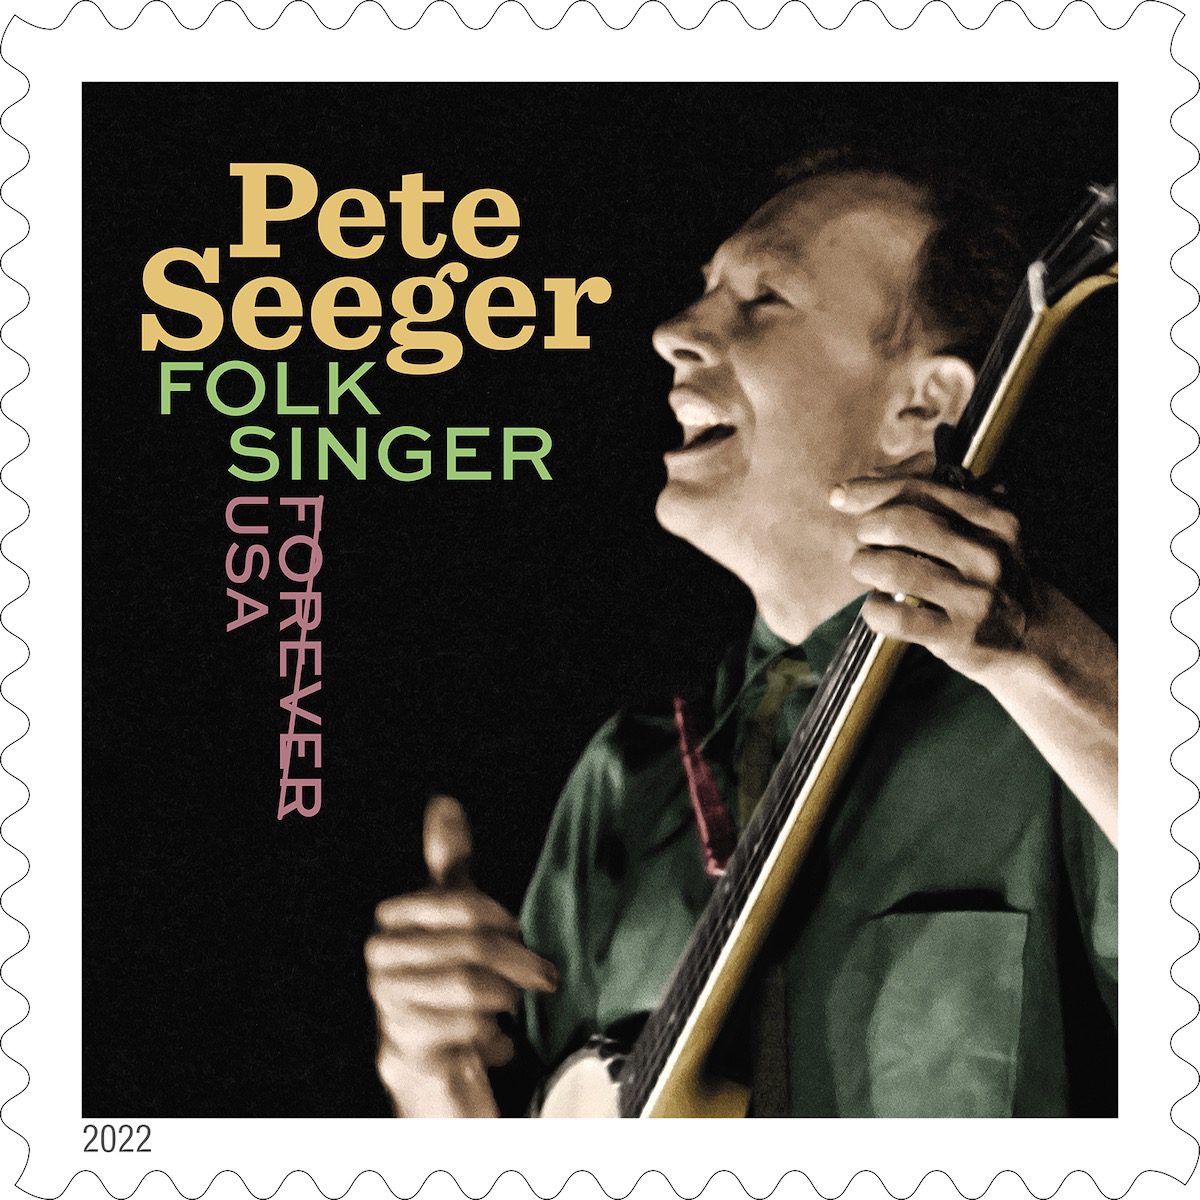 A USPS postage stamp featuring Pete Seeger singing and playing banjo